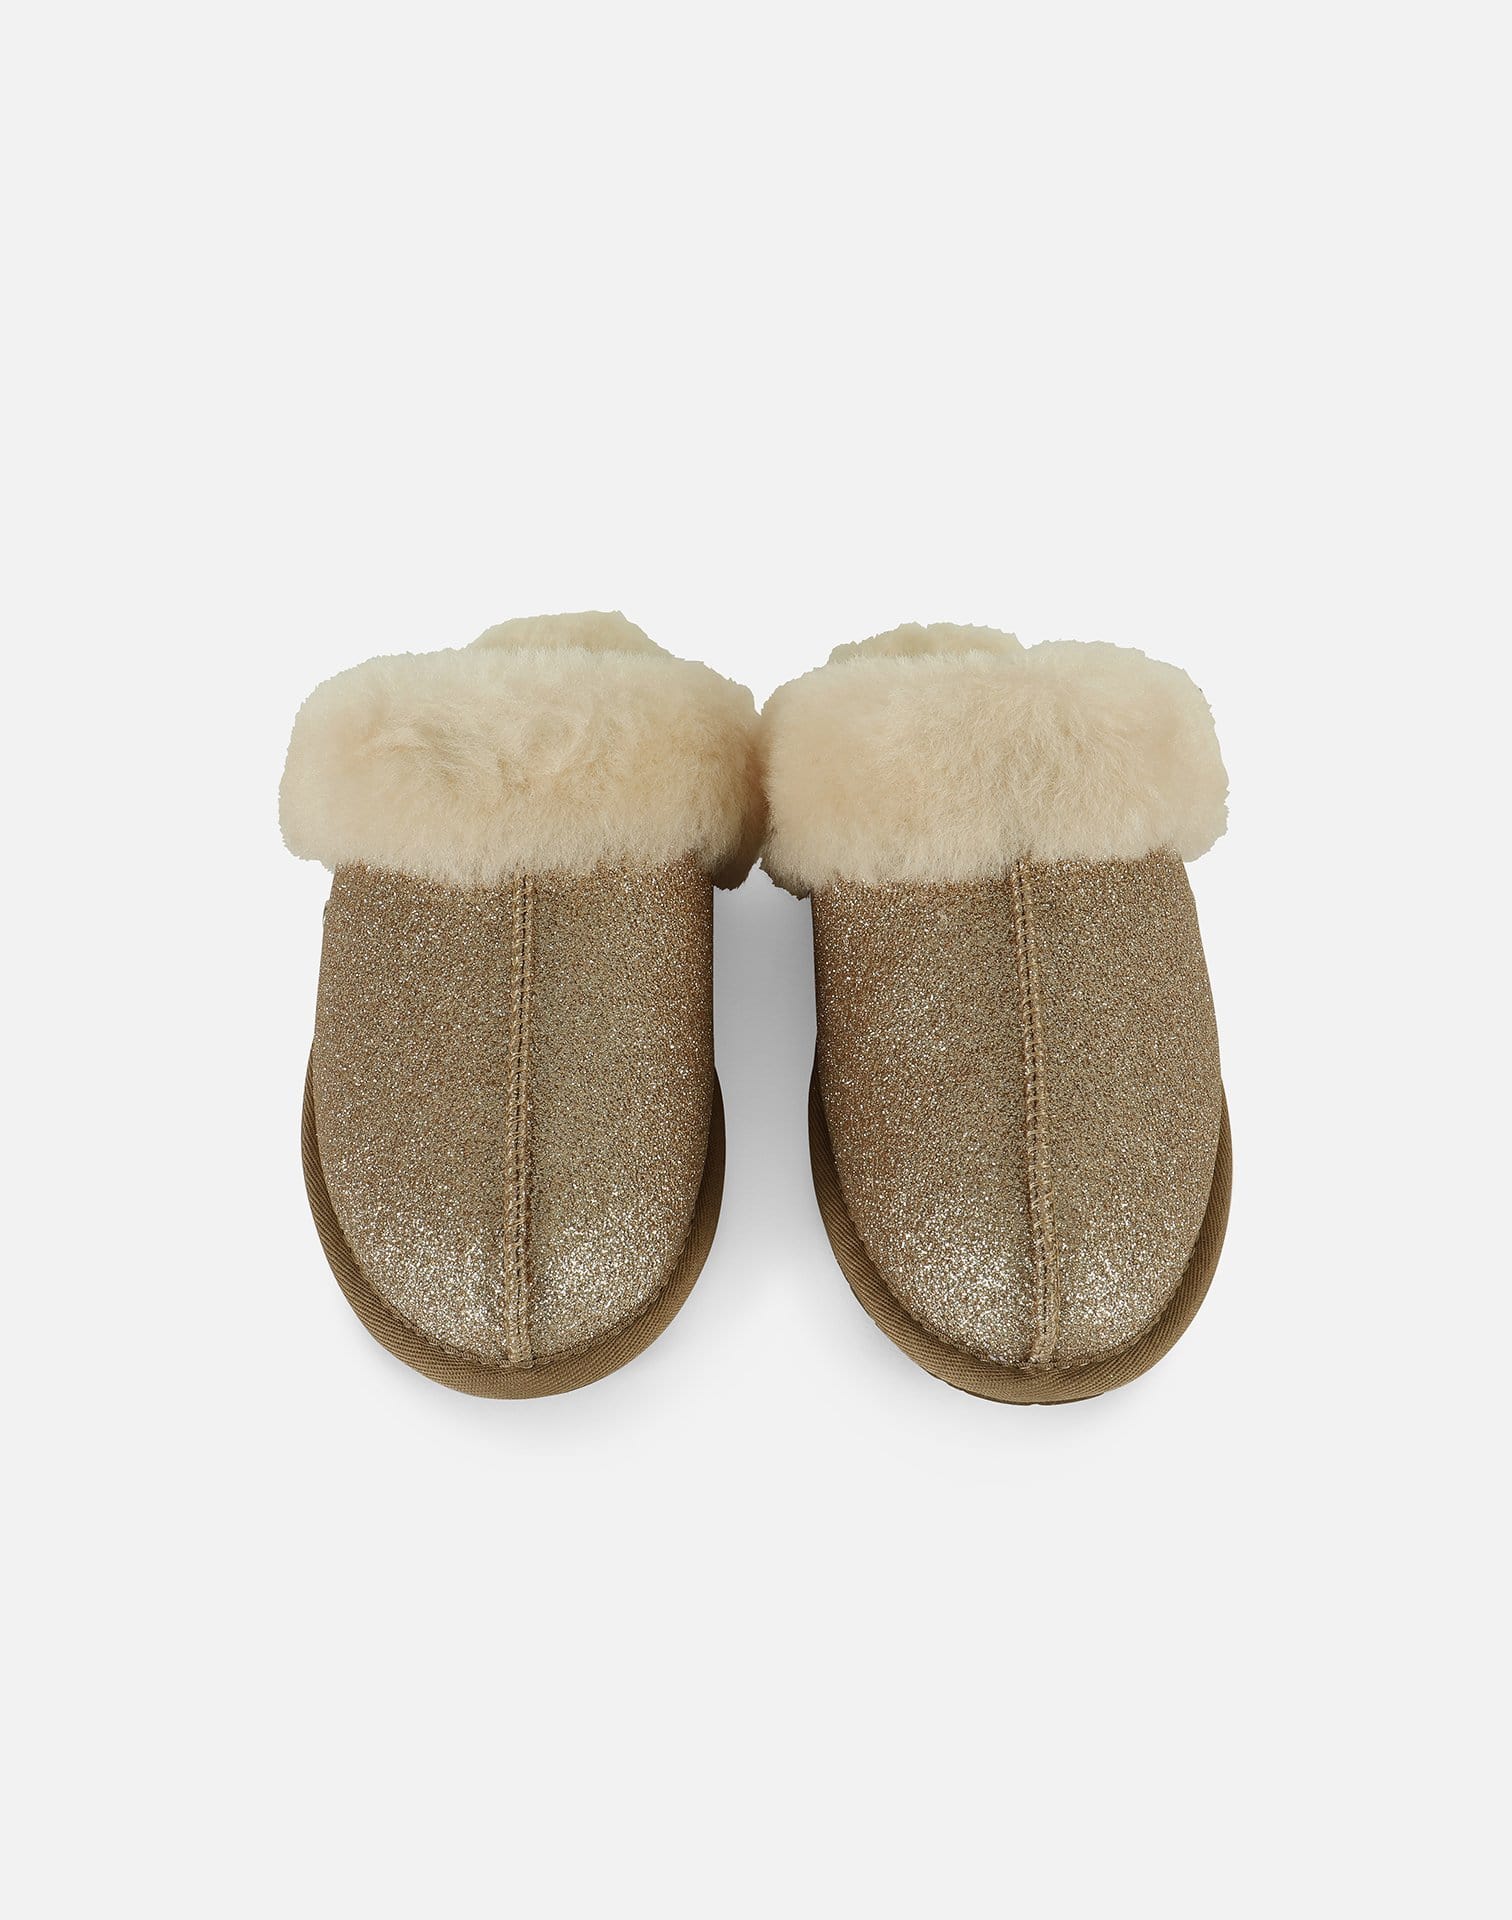 gold ugg slippers